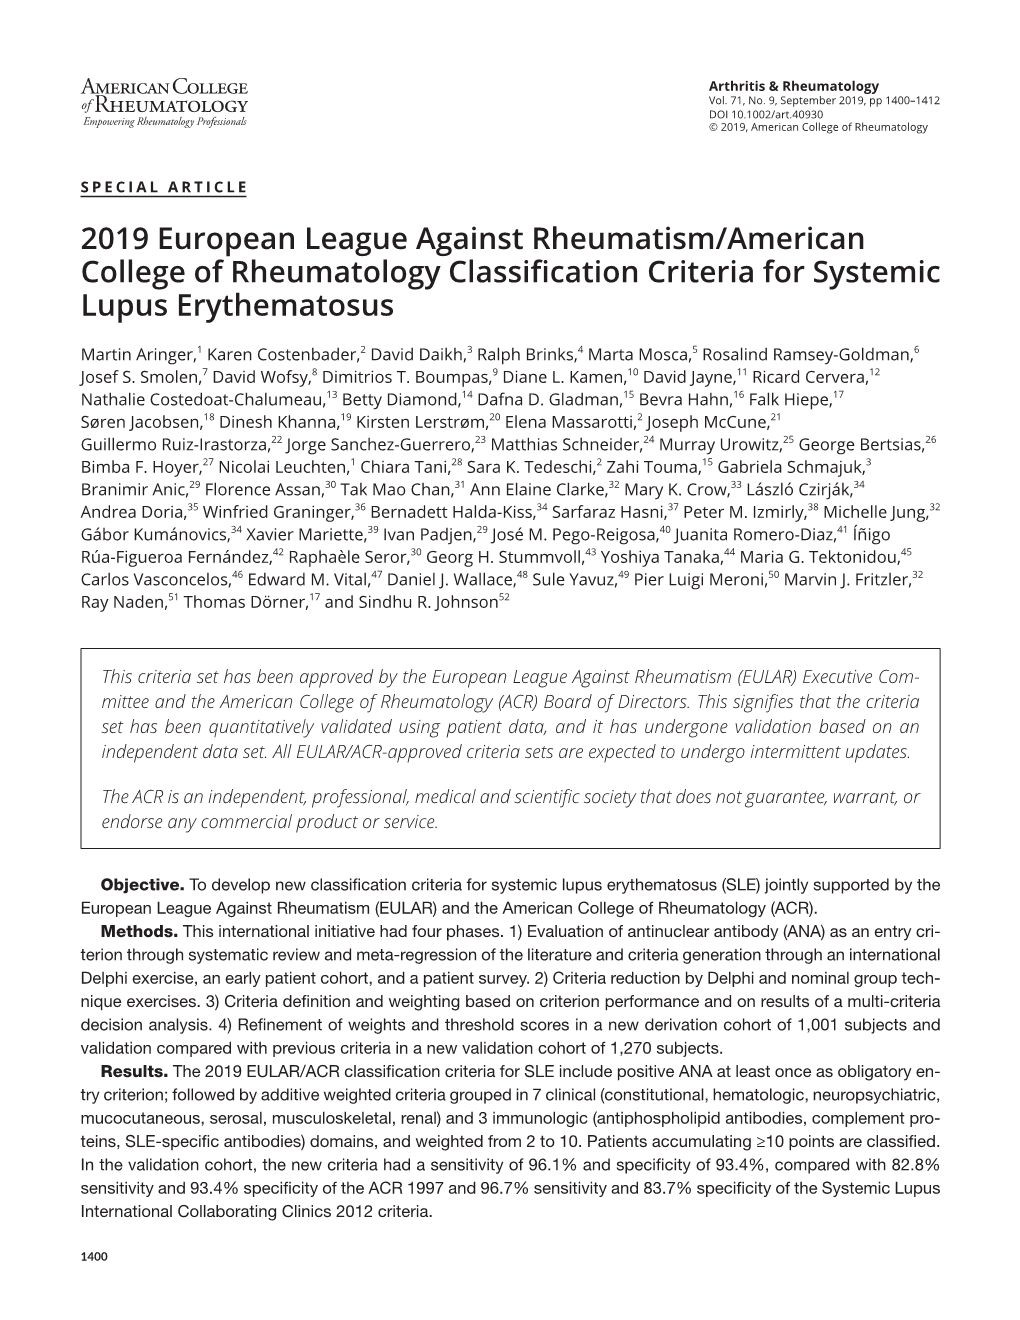 American College of Rheumatology Classification Criteria for Systemic Lupus Erythematosus